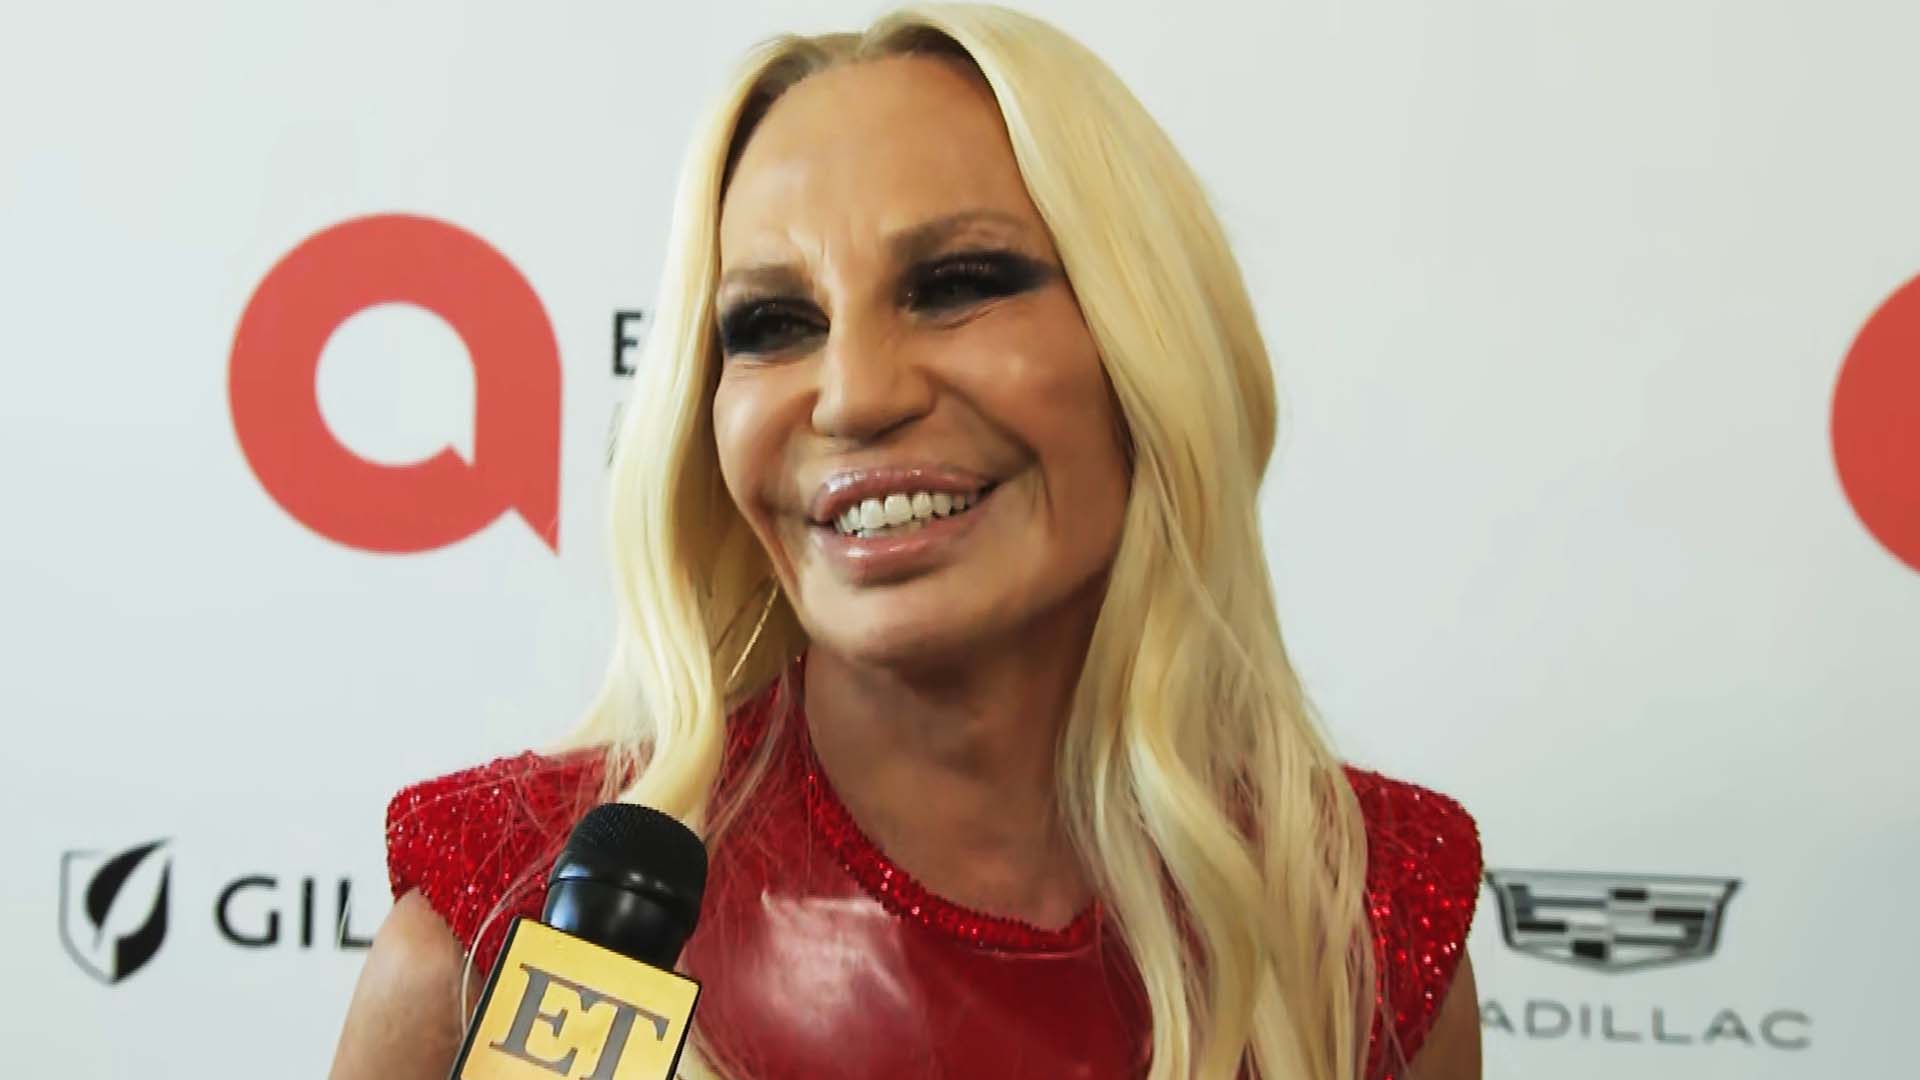 Donatella Versace Makes a House Call to Britney Spears and Sam Asghari